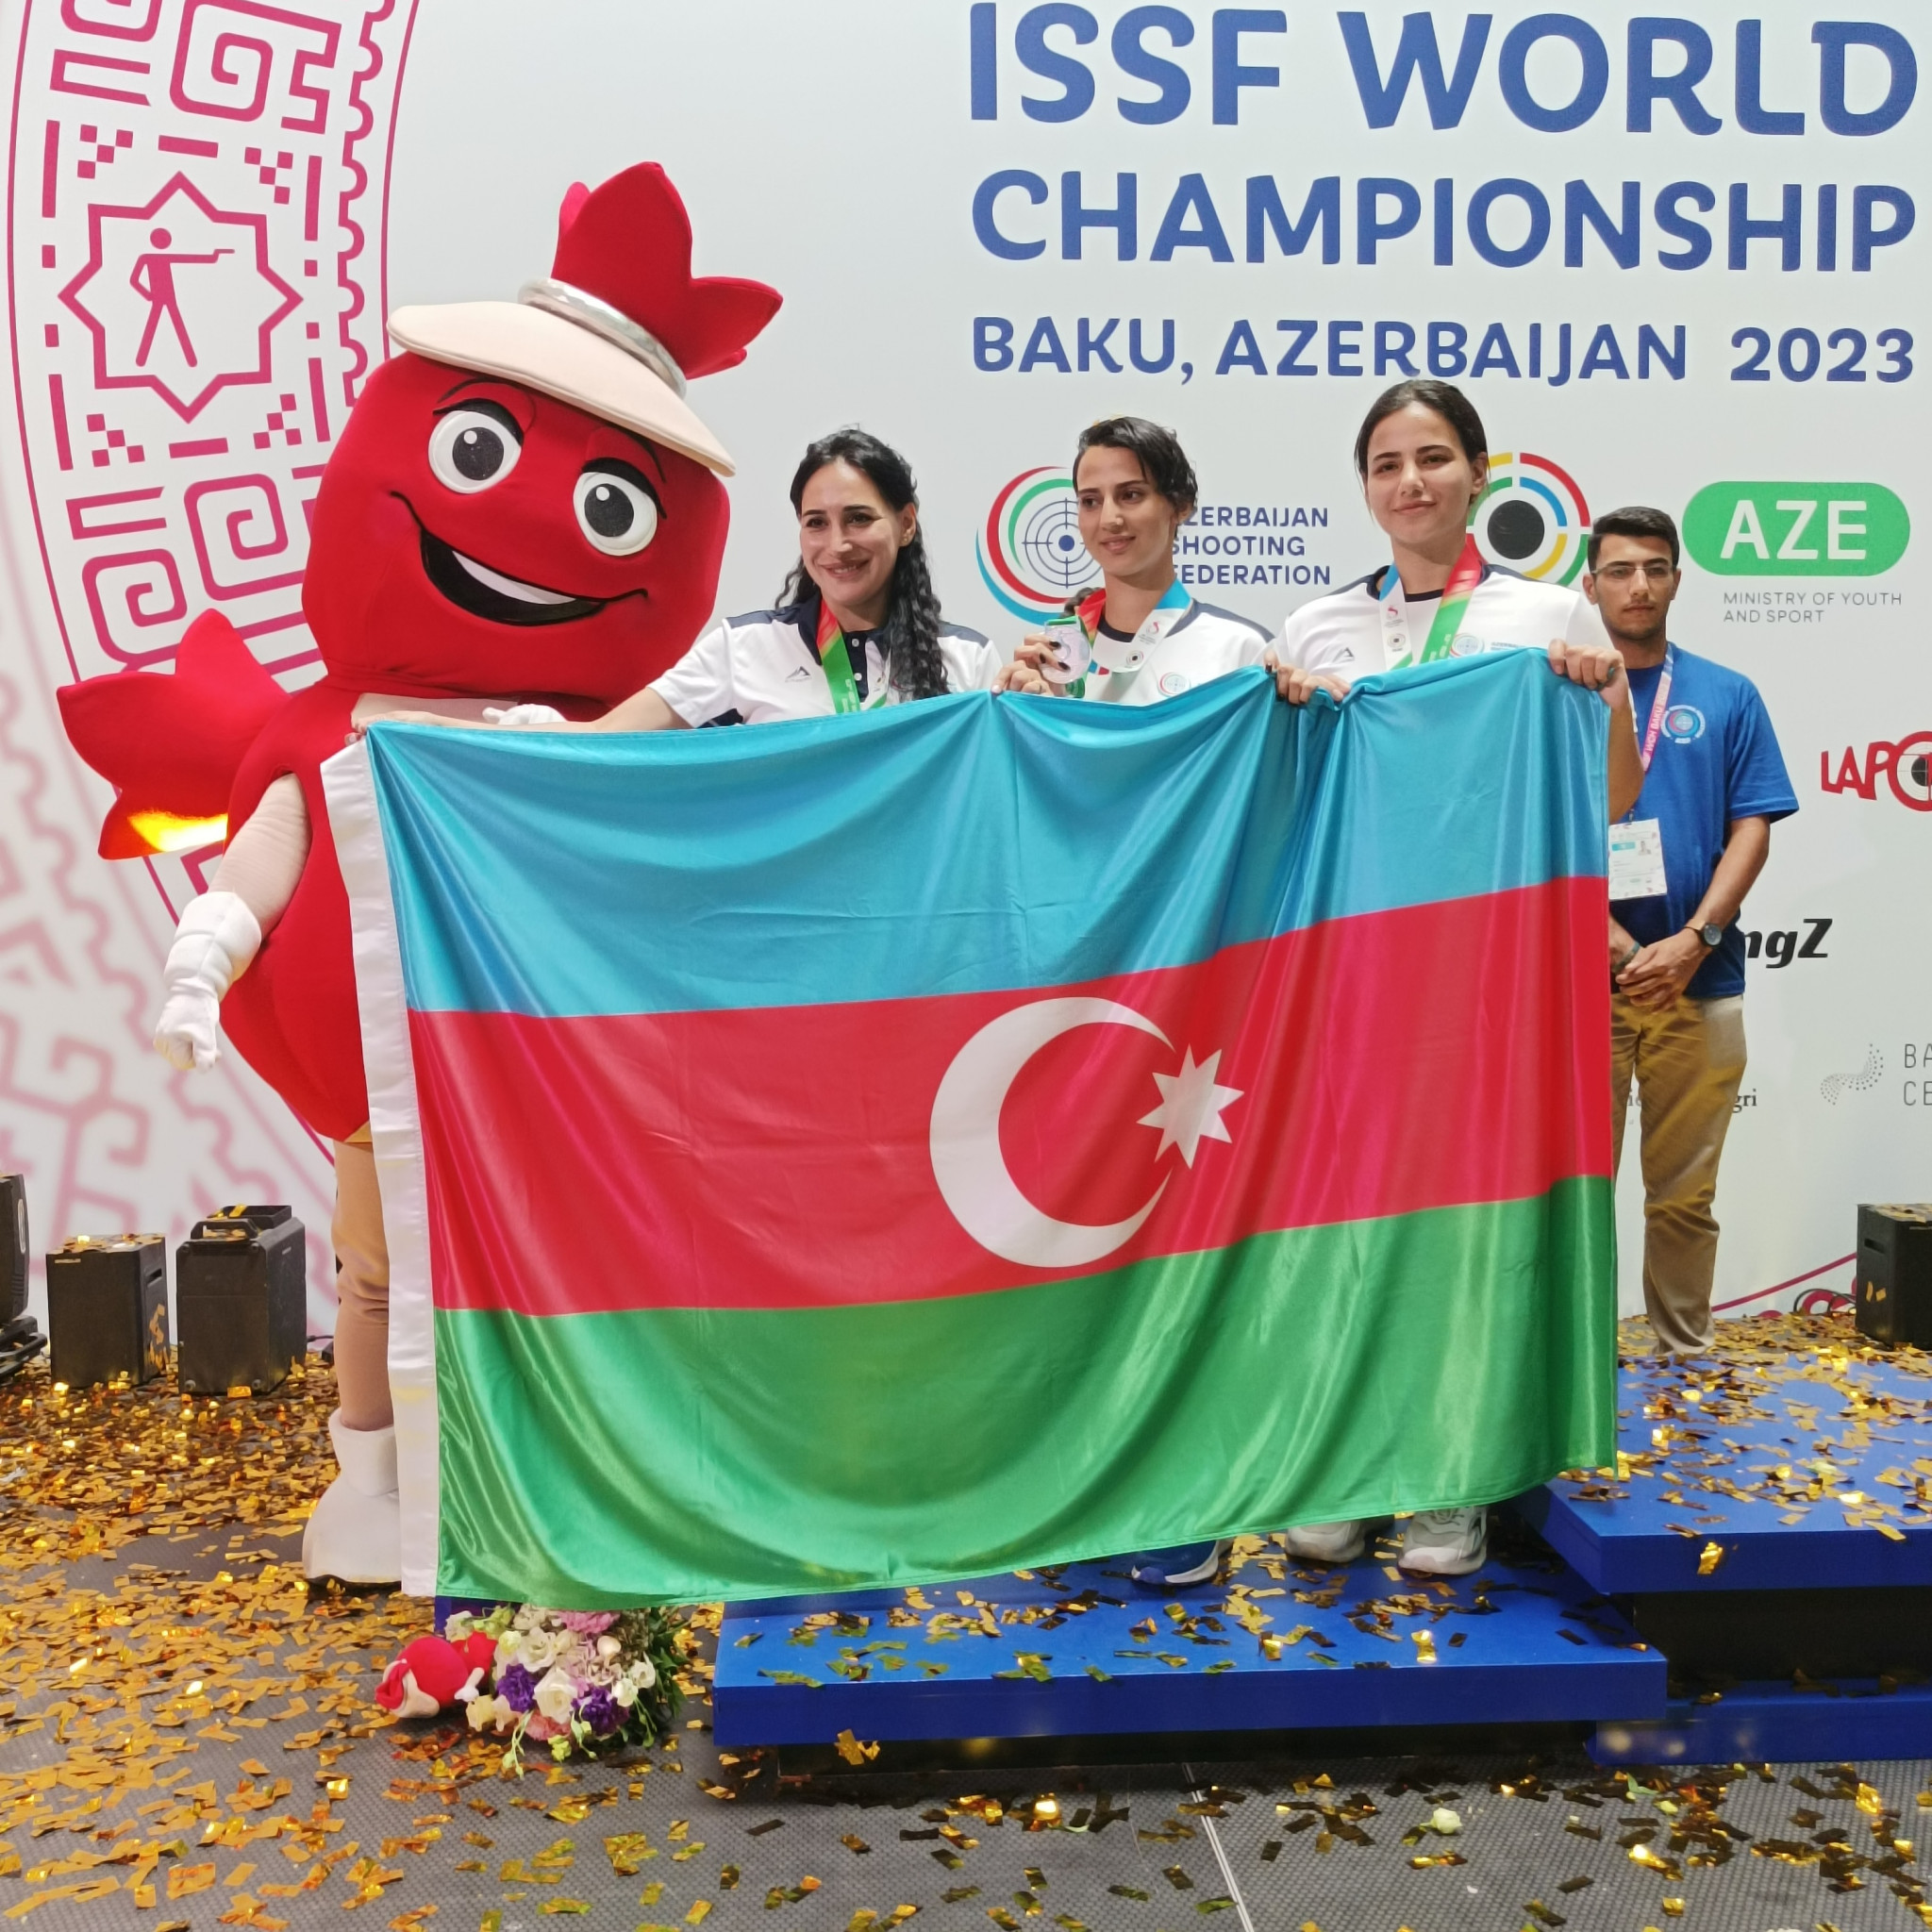 Azerbaijan's silver medal was their first of the ISSF World Championships in Baku ©ITG